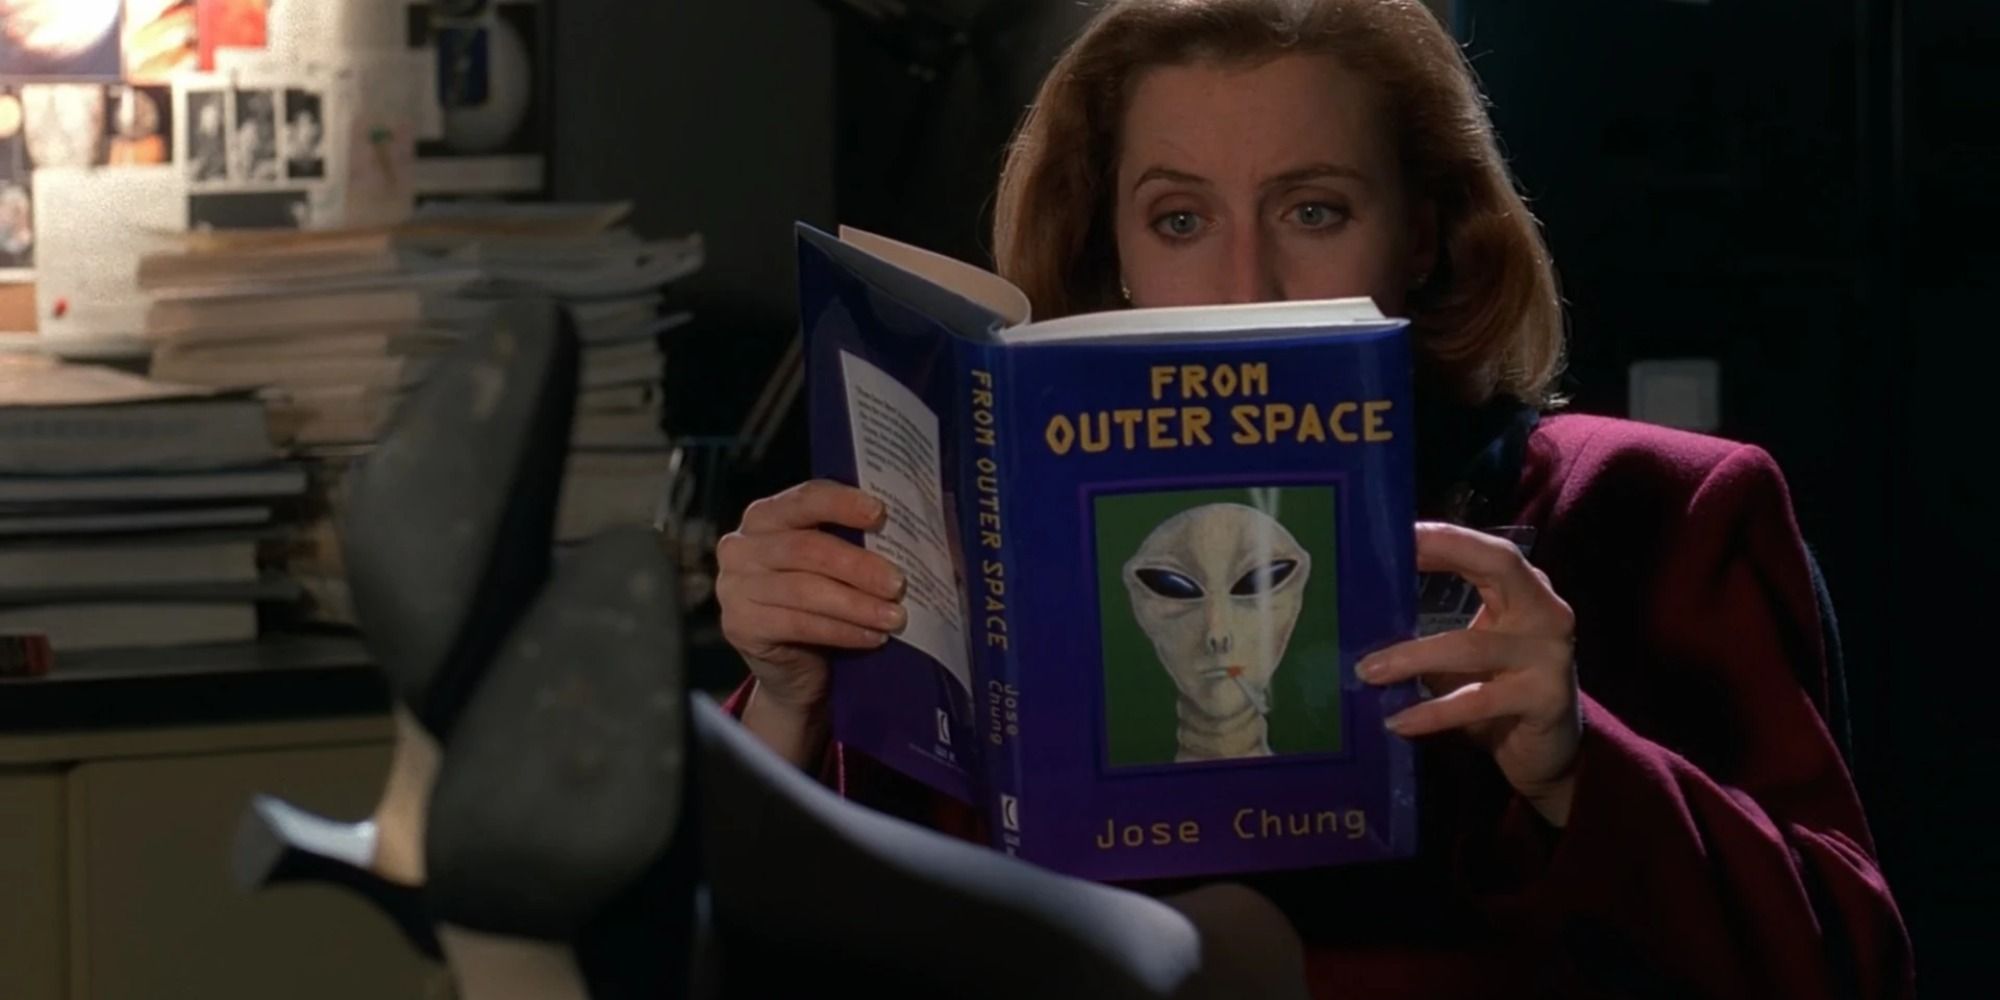 X-Files - Jose Chung's From Outer Space